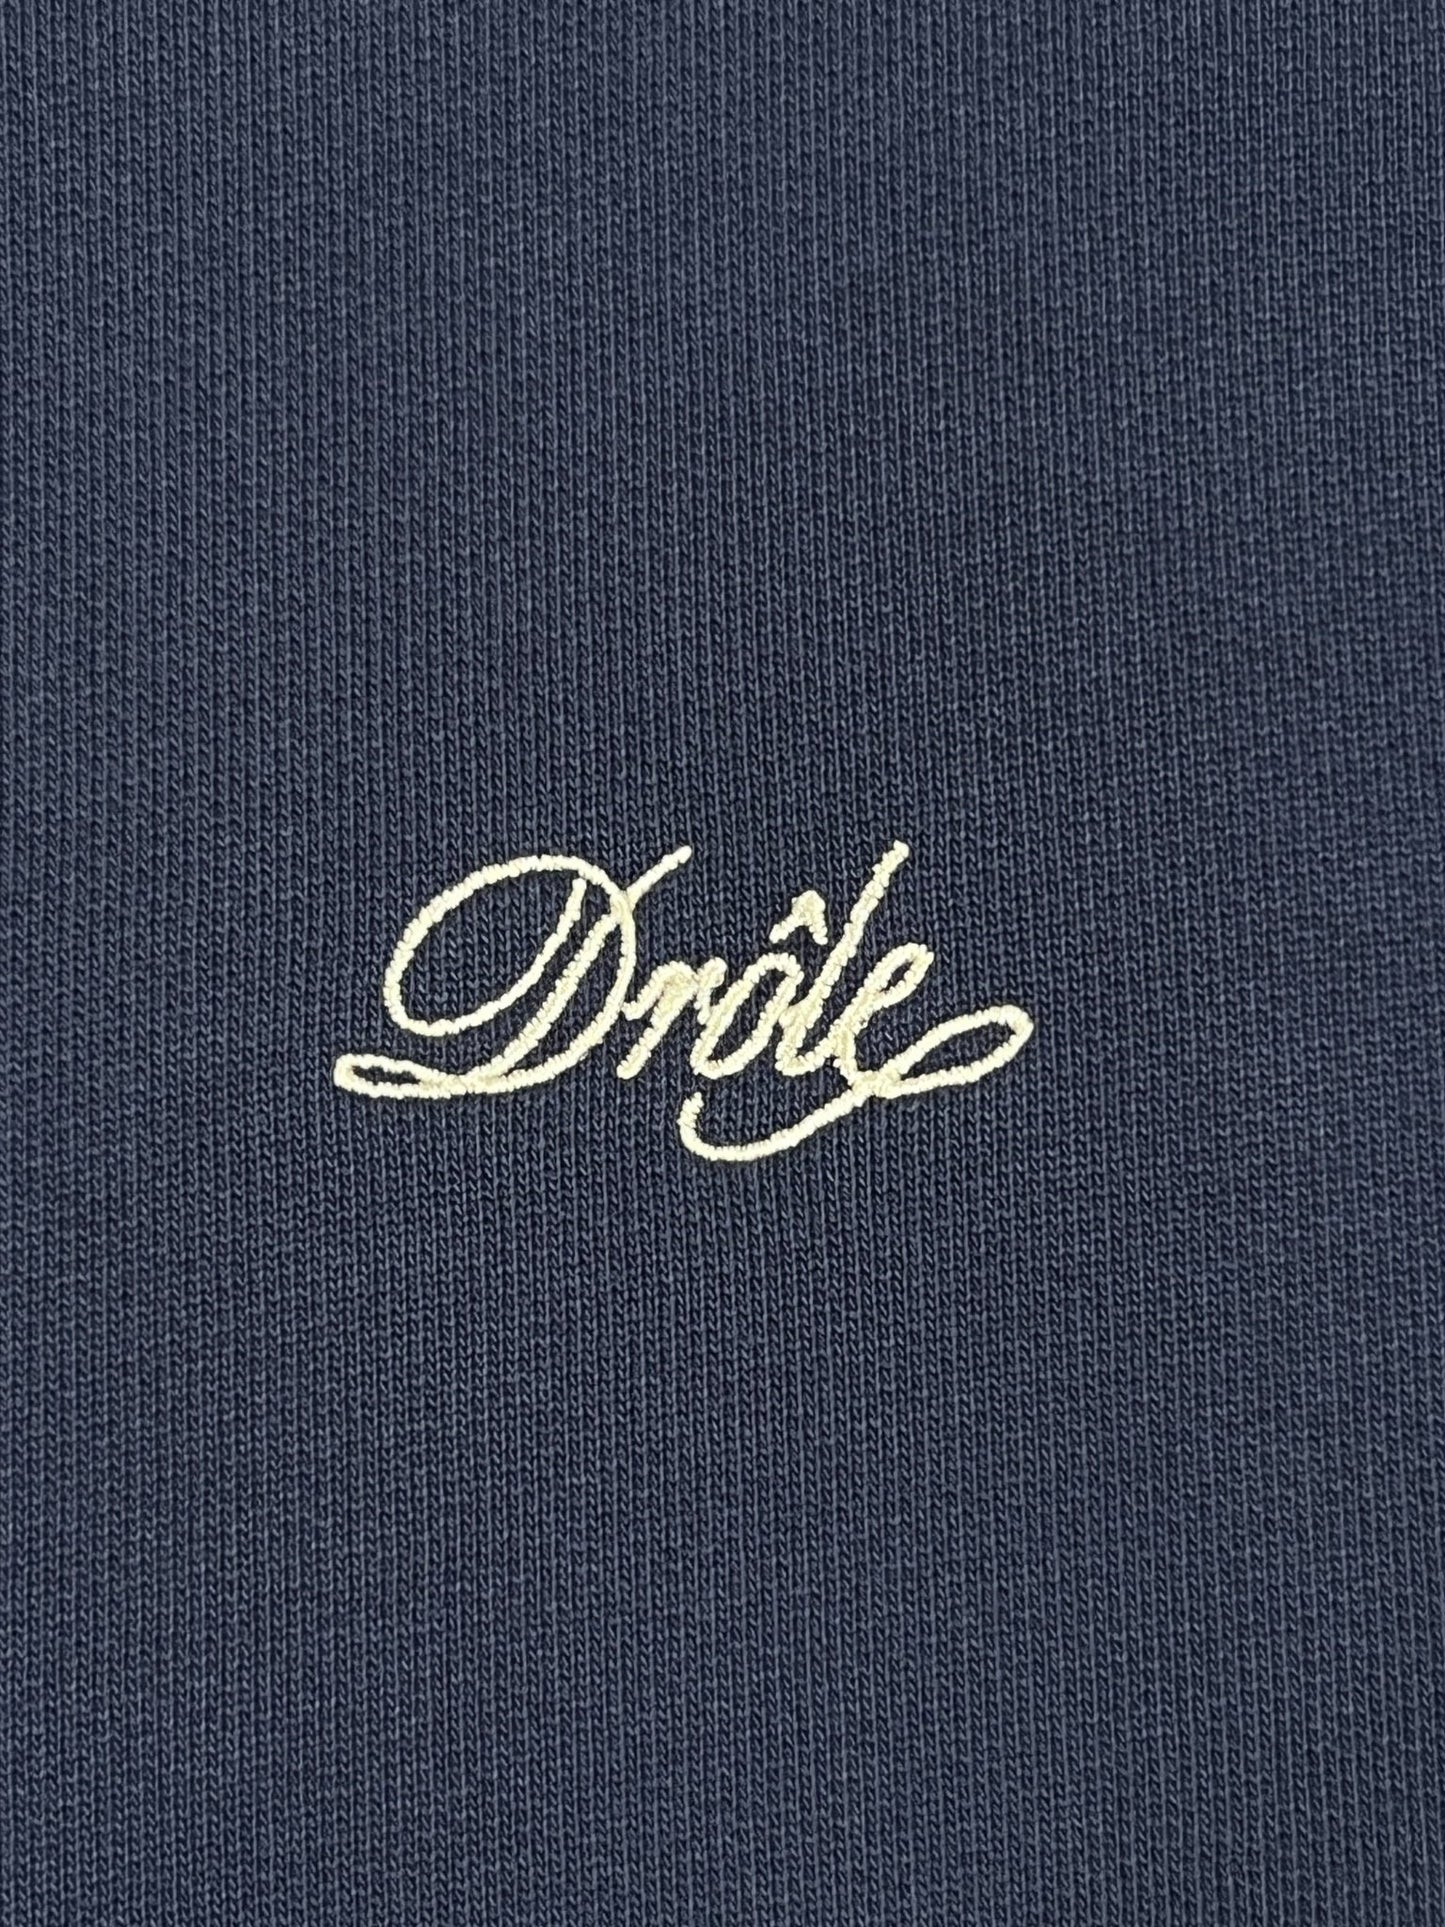 A close up of a Drole De Monsieur sweatshirt with the word dribe embroidered on it.